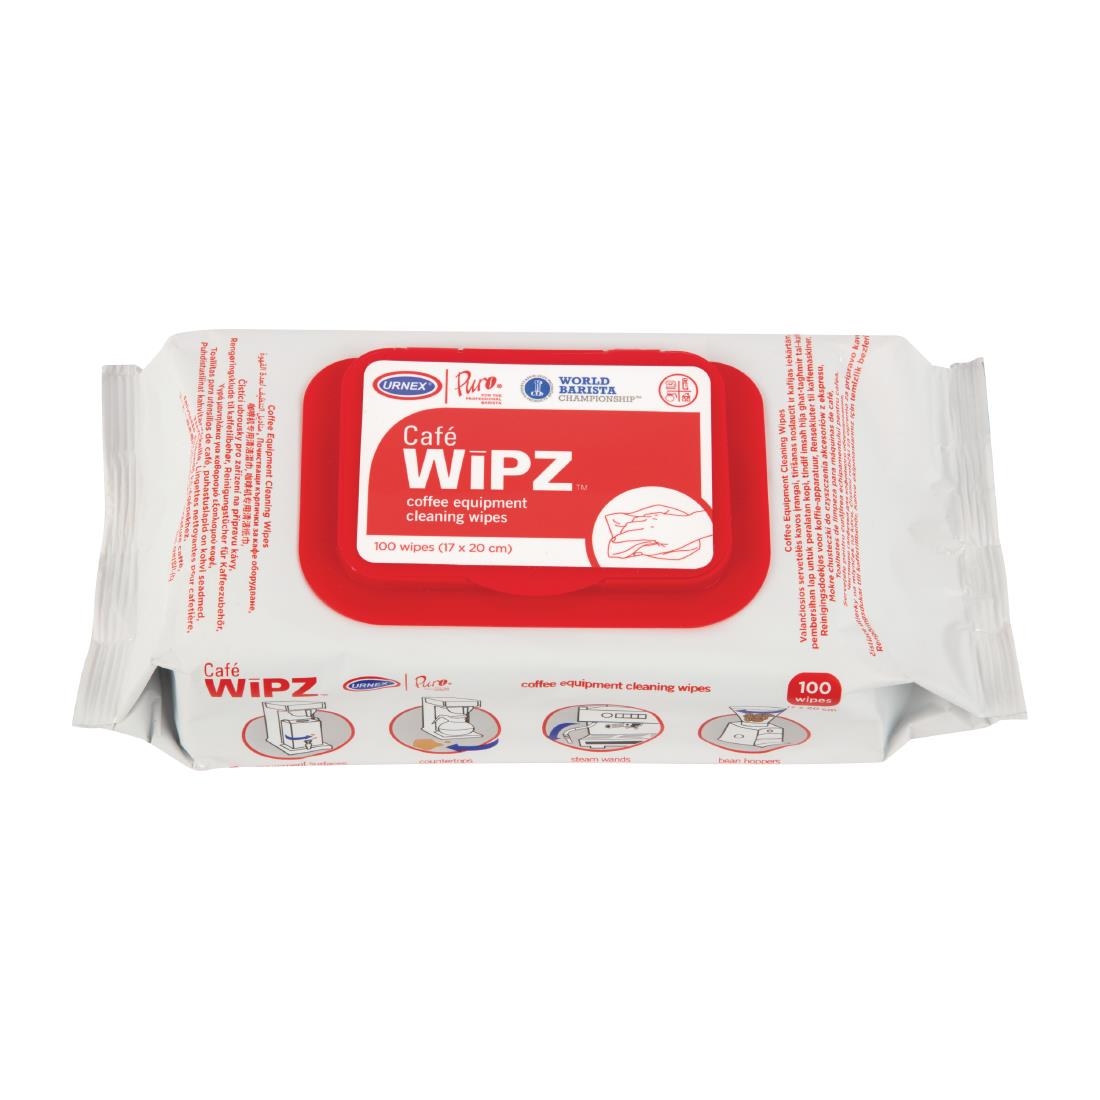 Urnex Café Wipz Coffee Equipment Cleaning Wipes (12 x 100 Pack)